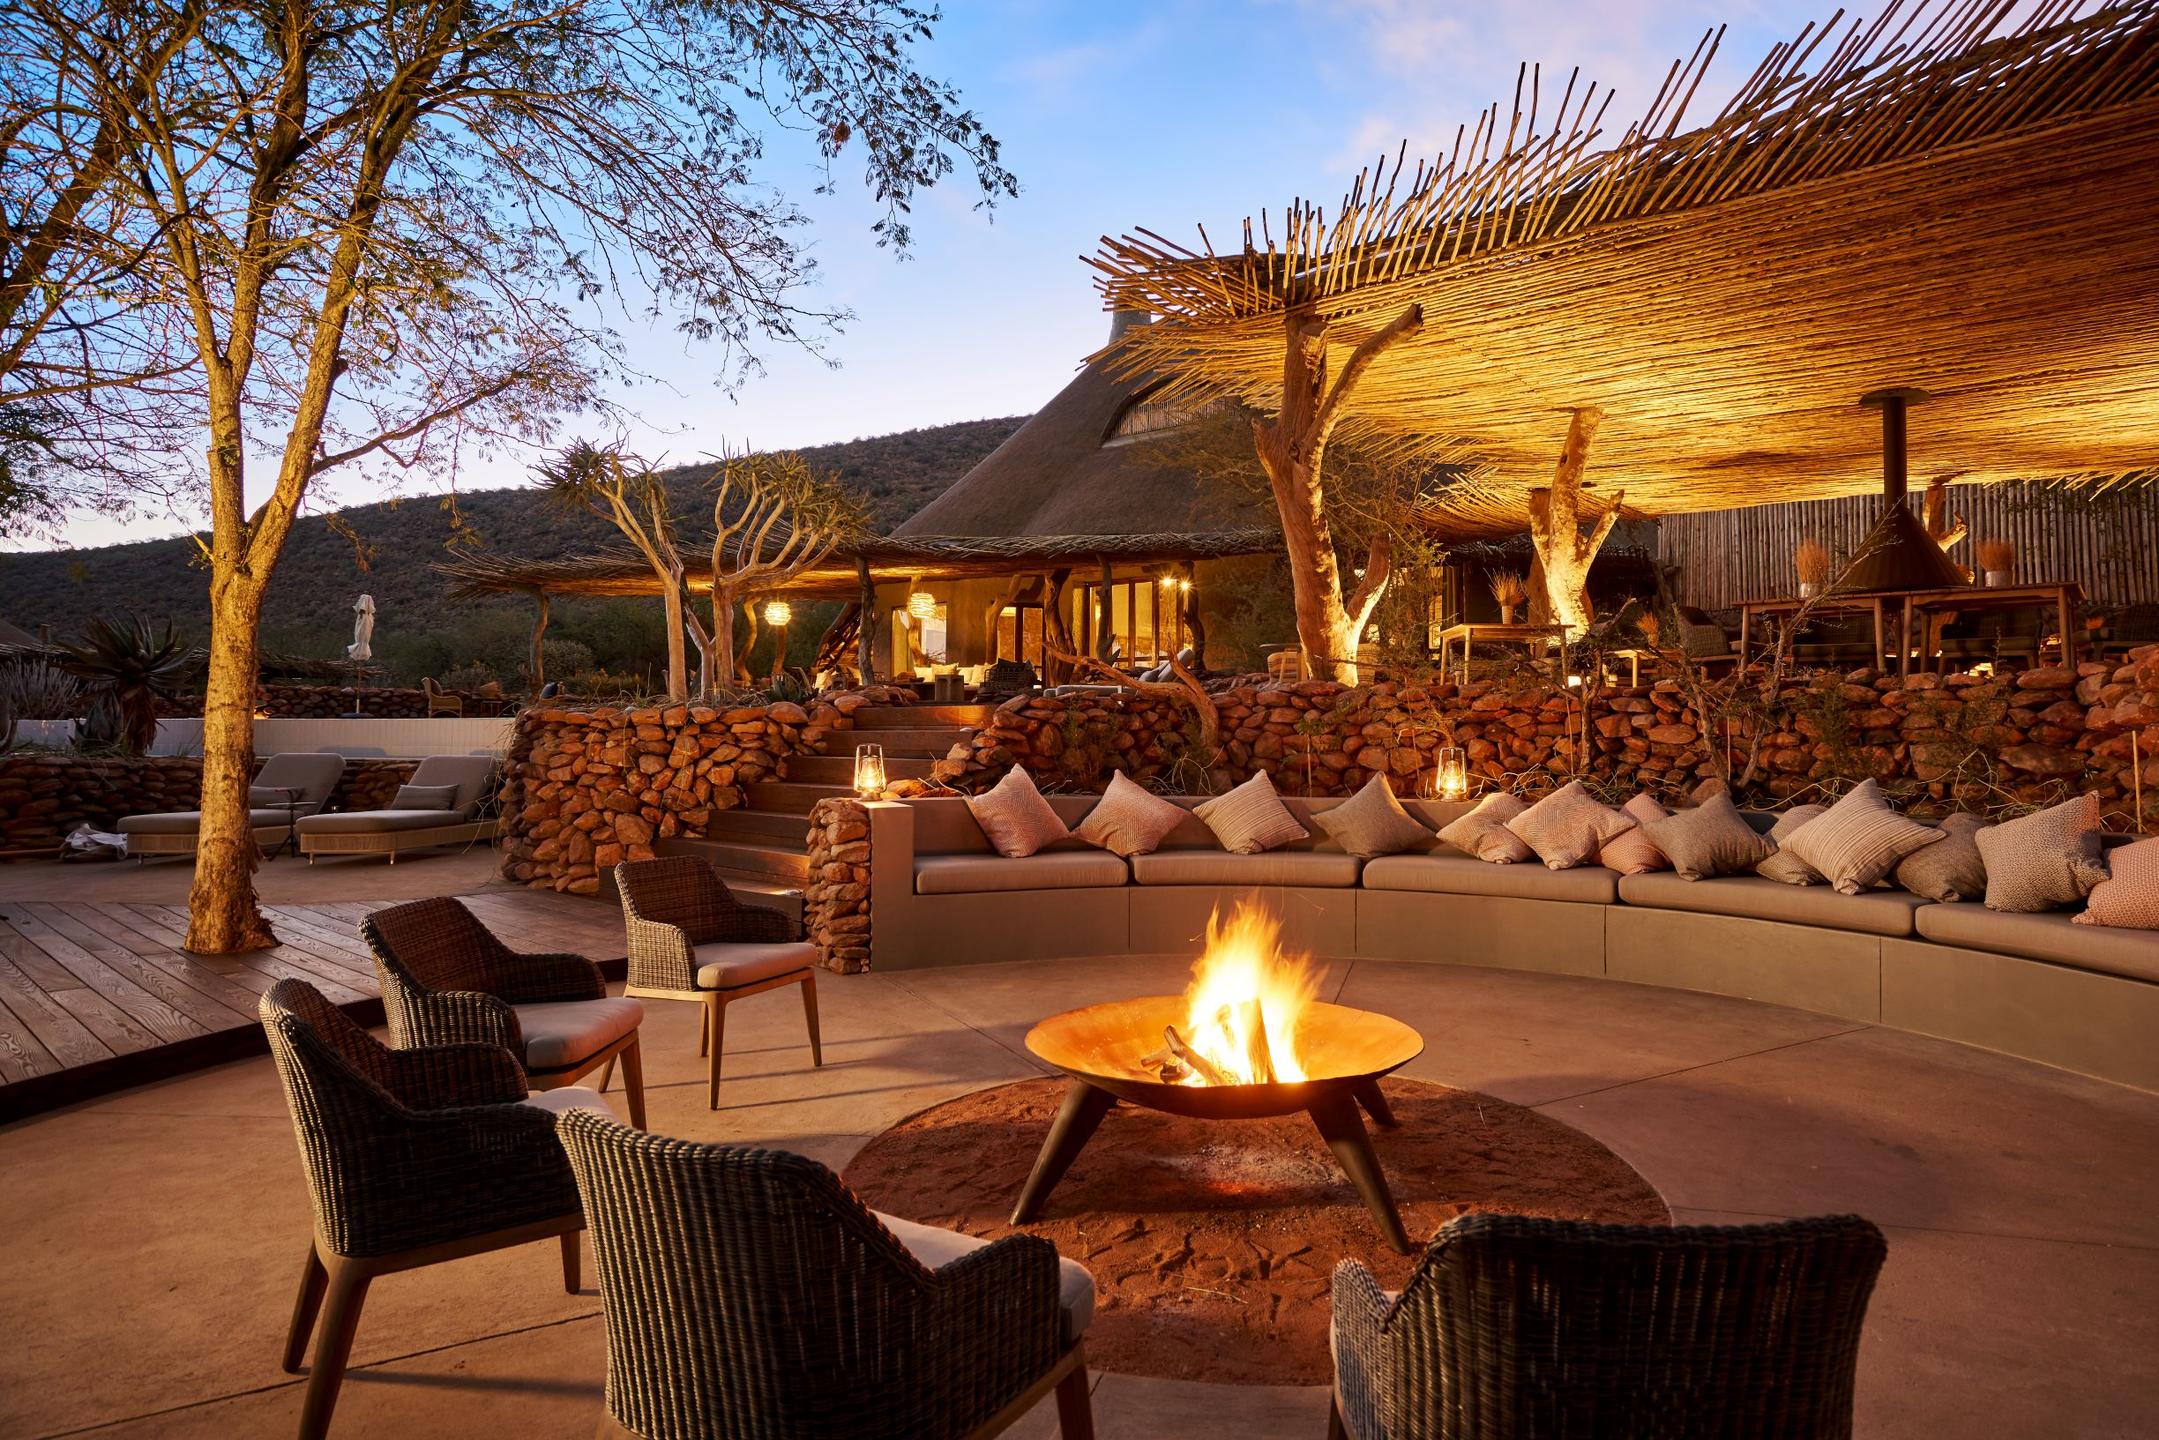 The outdoor fireplace at Tswalu's The Motse lodge